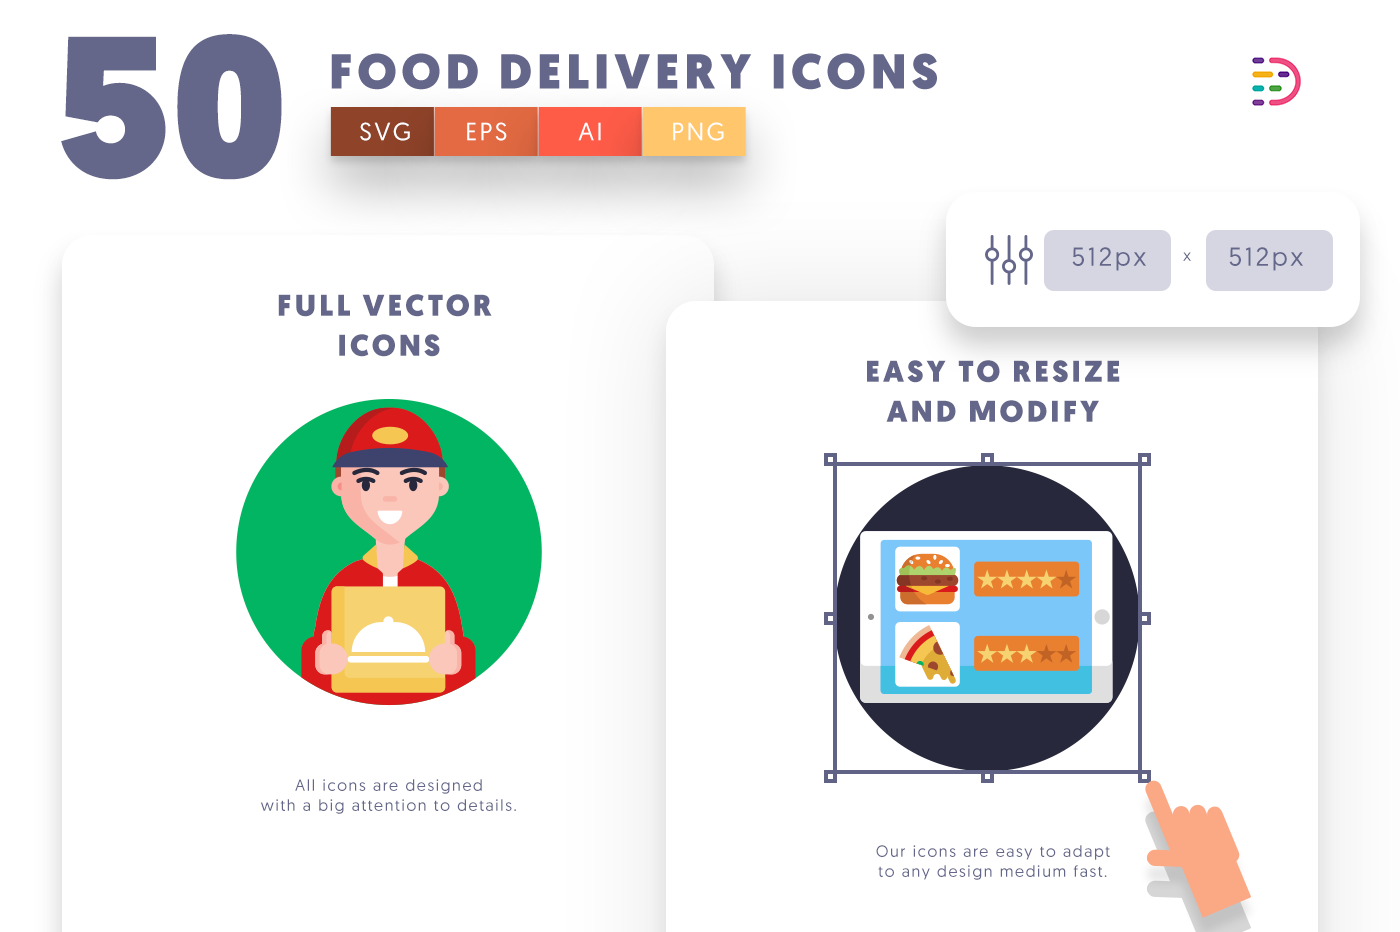 Full vector Food delivery Icons